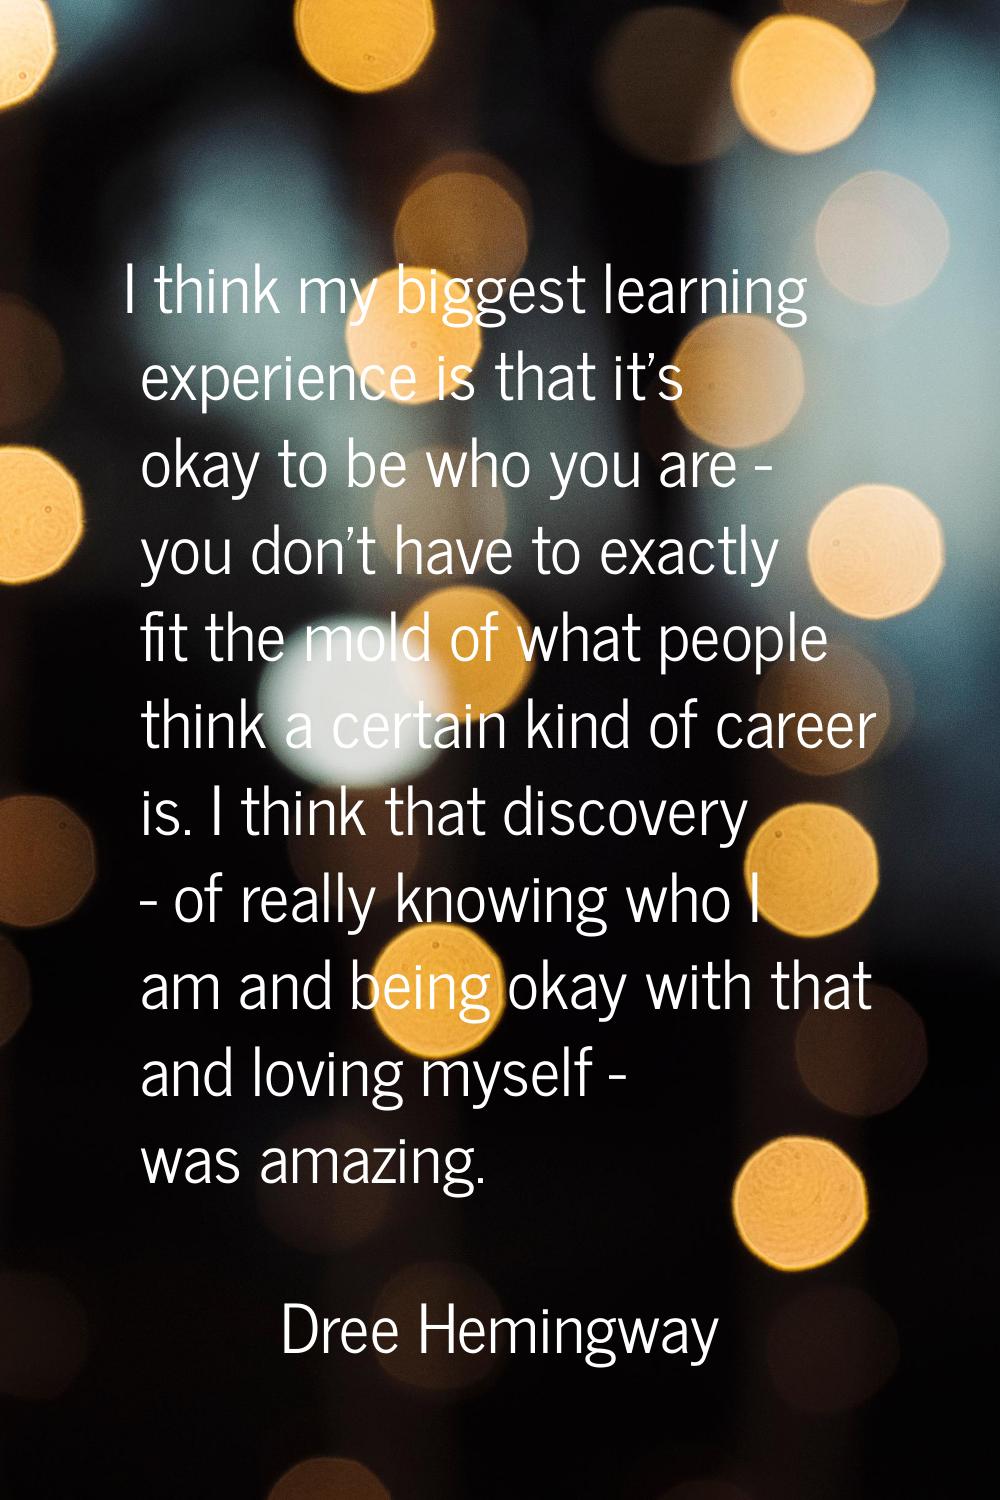 I think my biggest learning experience is that it's okay to be who you are - you don't have to exac